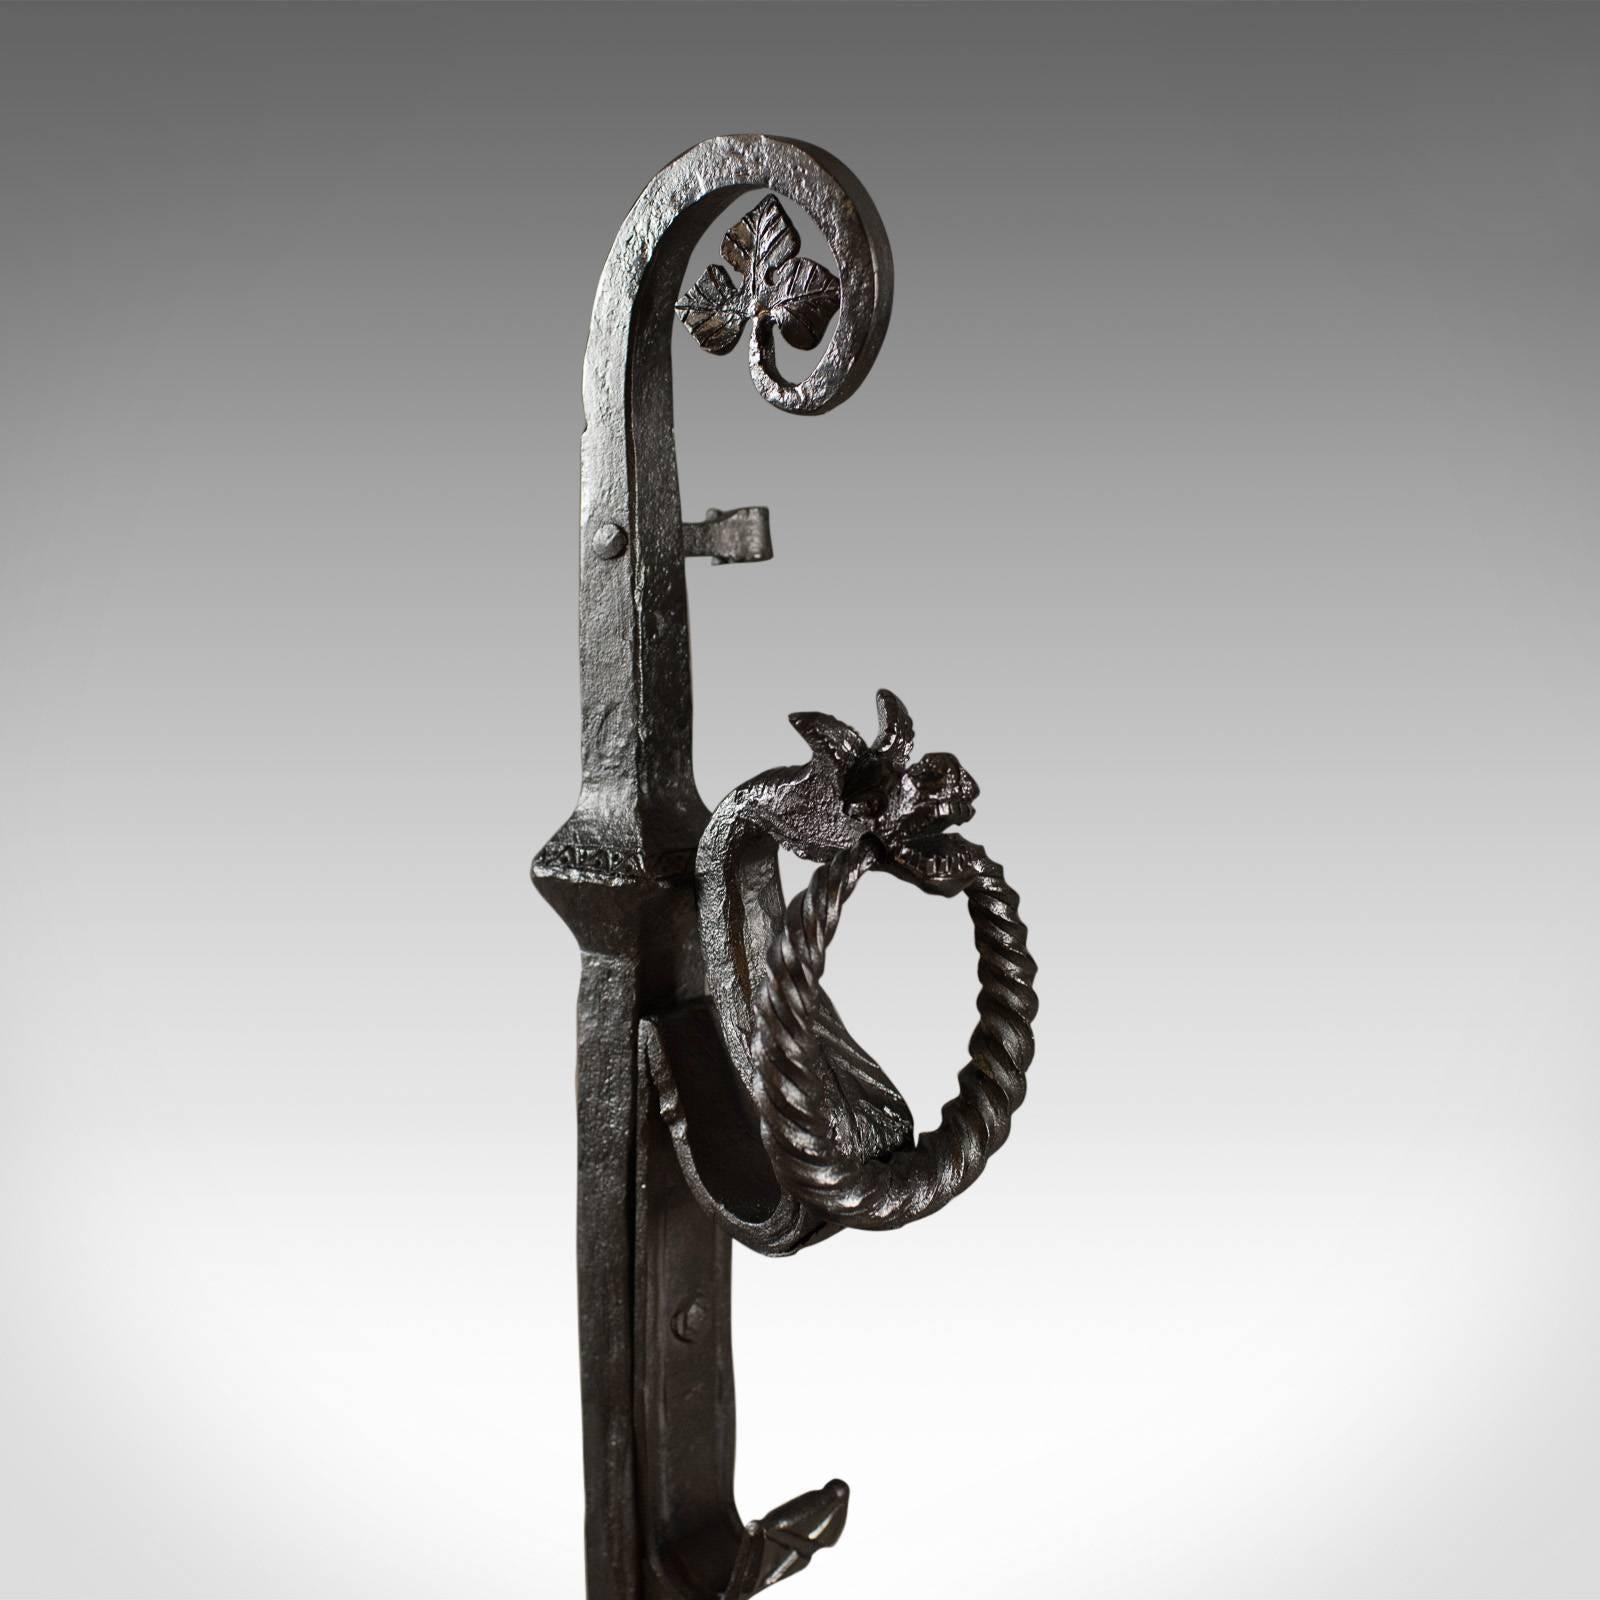 English Gothic Wrought Iron Firedogs, Medieval Revival Andirons, Late 20th Century